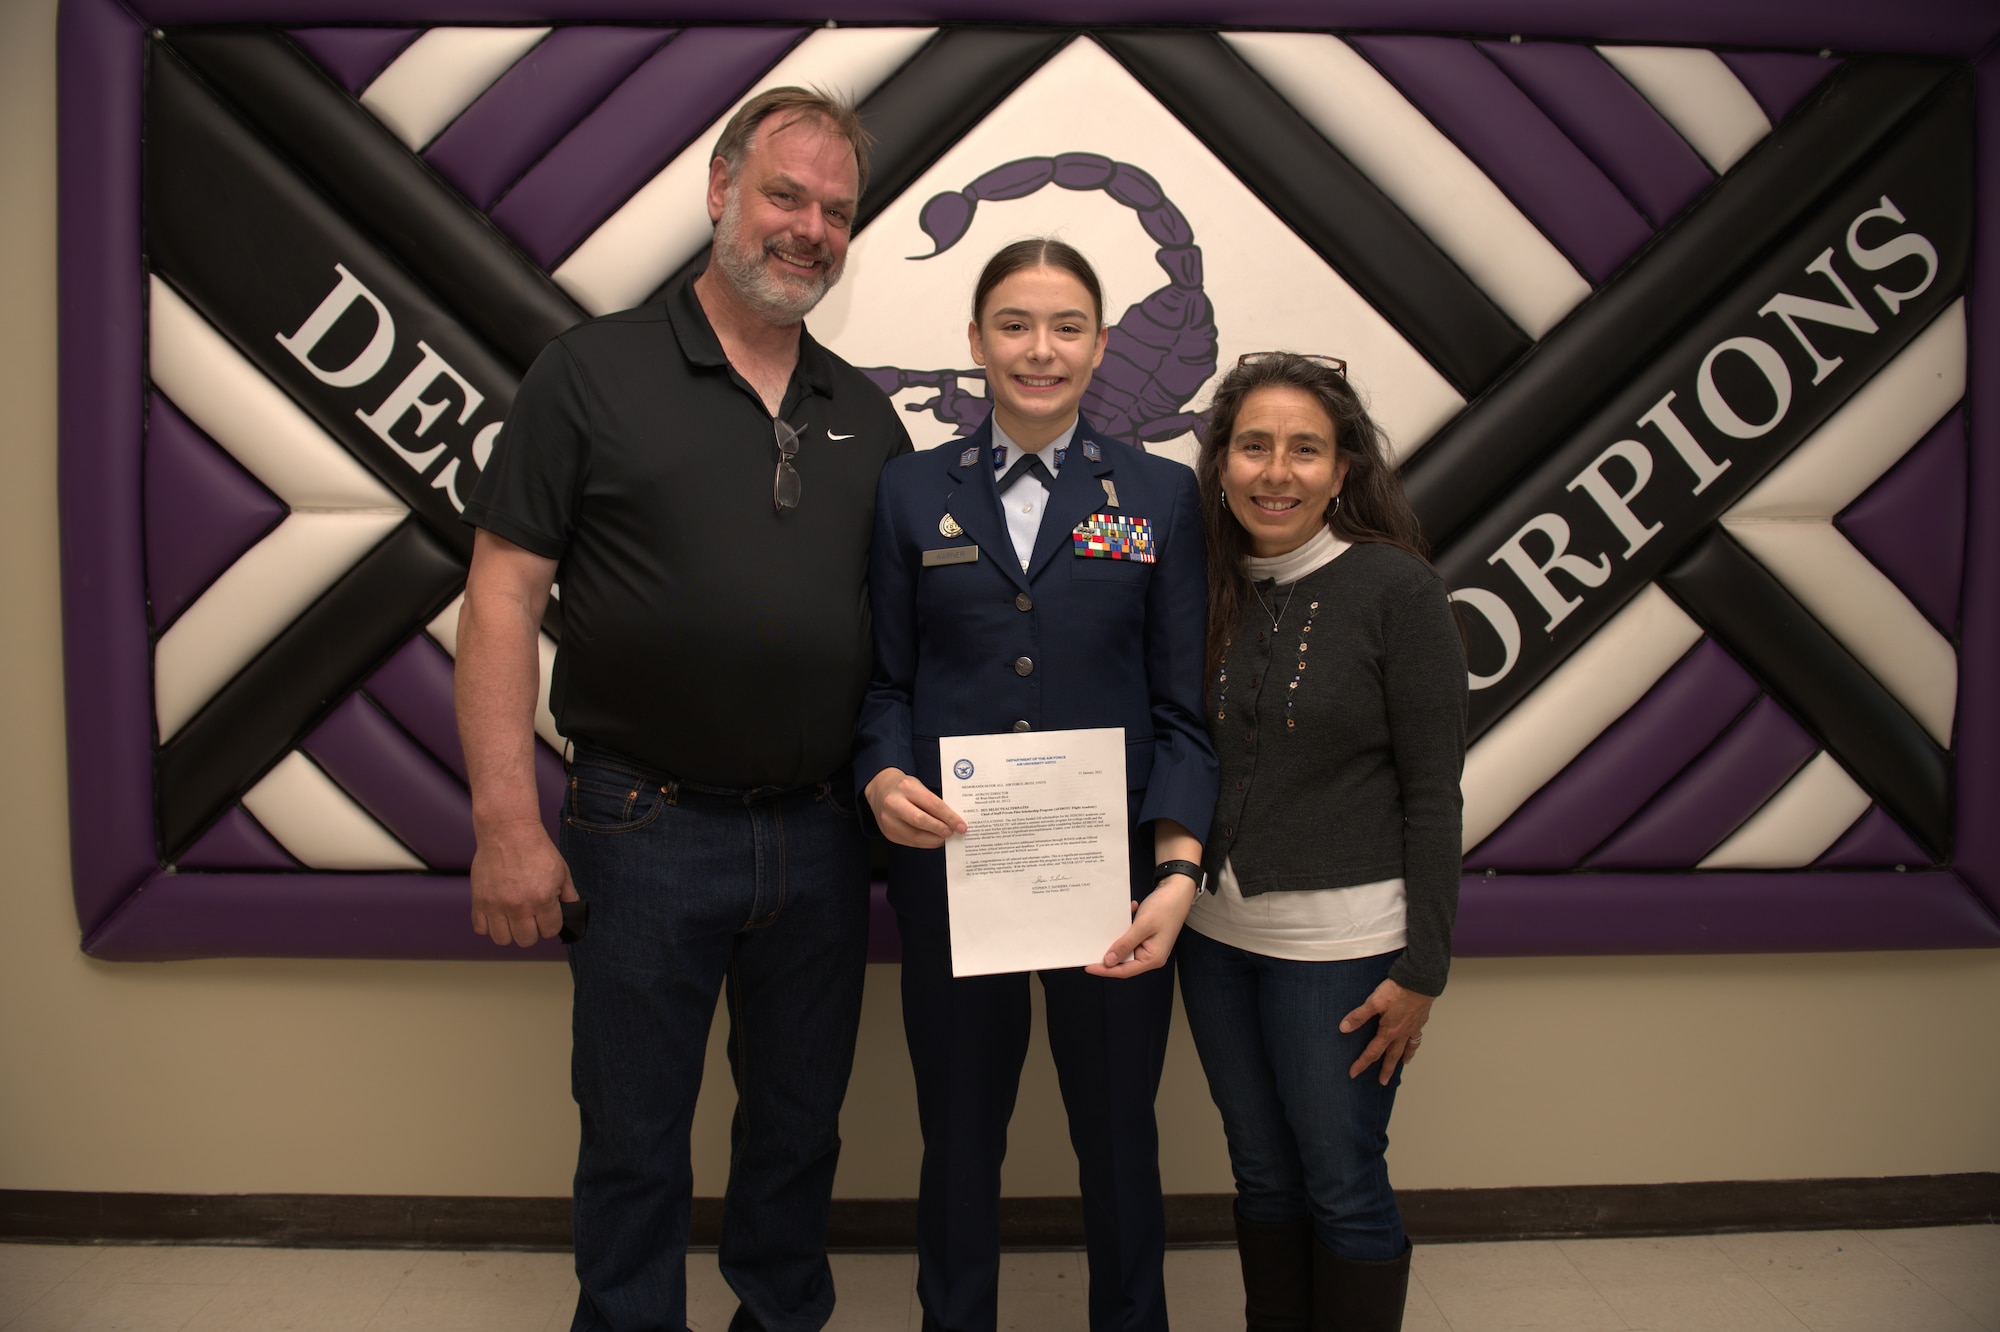 Air Force Junior ROTC Cadet Nicole Warner, a student at Desert Junior Senior High School on Edwards Air Force Base, Calif., poses with parents Aric Warner and Alma Warner during a brief ceremony in Desert JSHS, Feb. 10. Nicole, 17, was recently selected to receive a scholarship to attend an accredited aviation university participating in a private pilot license-training program in the summer of 2021.